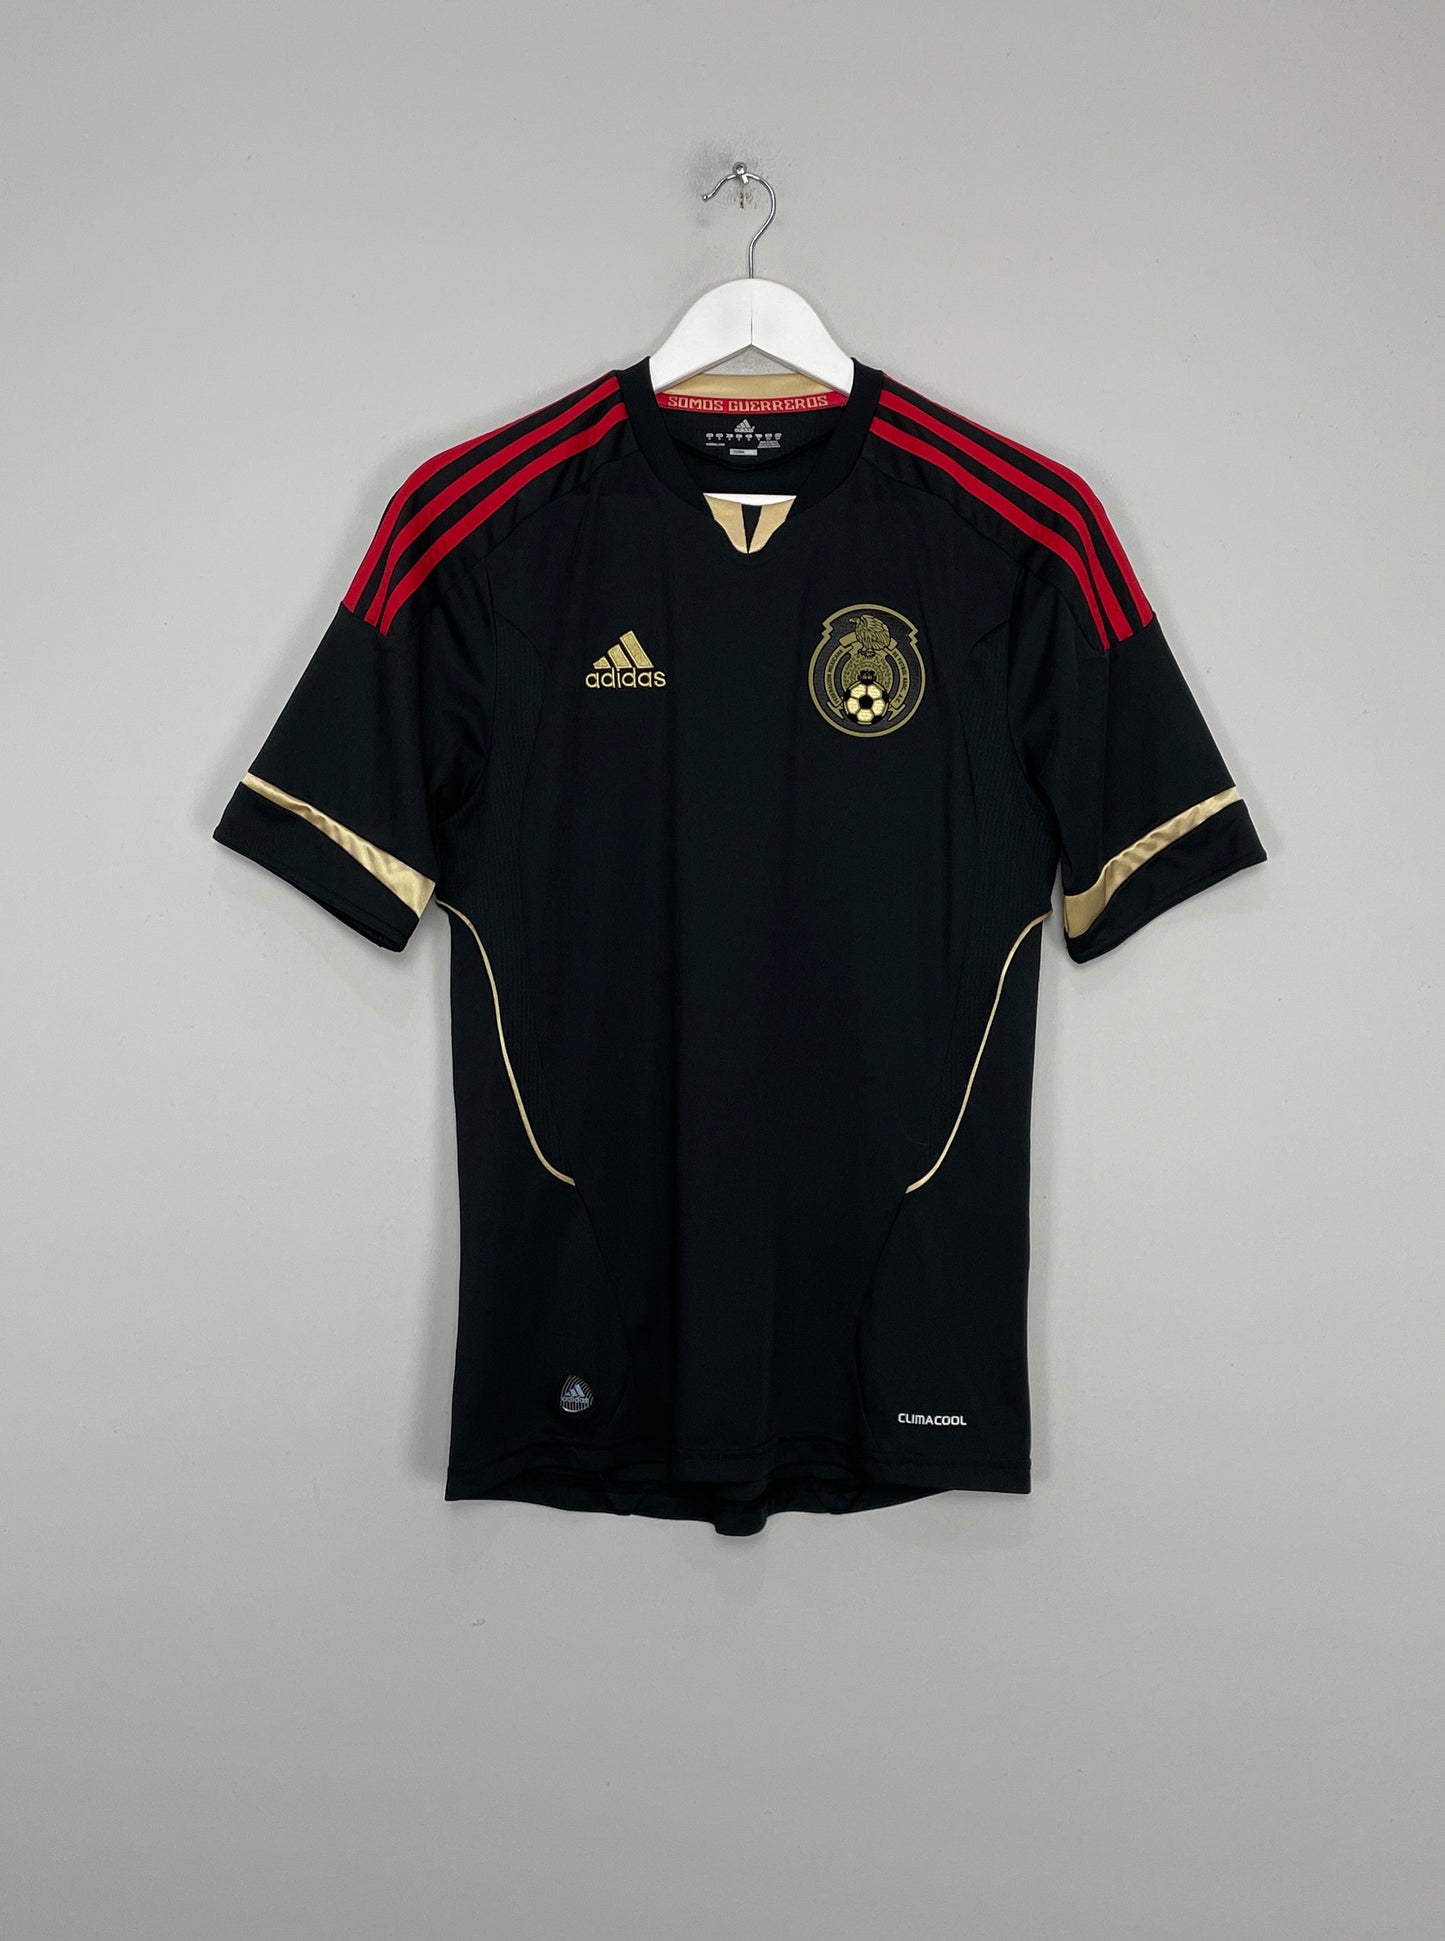 Image of the Mexico shirt from the 2011/12 season